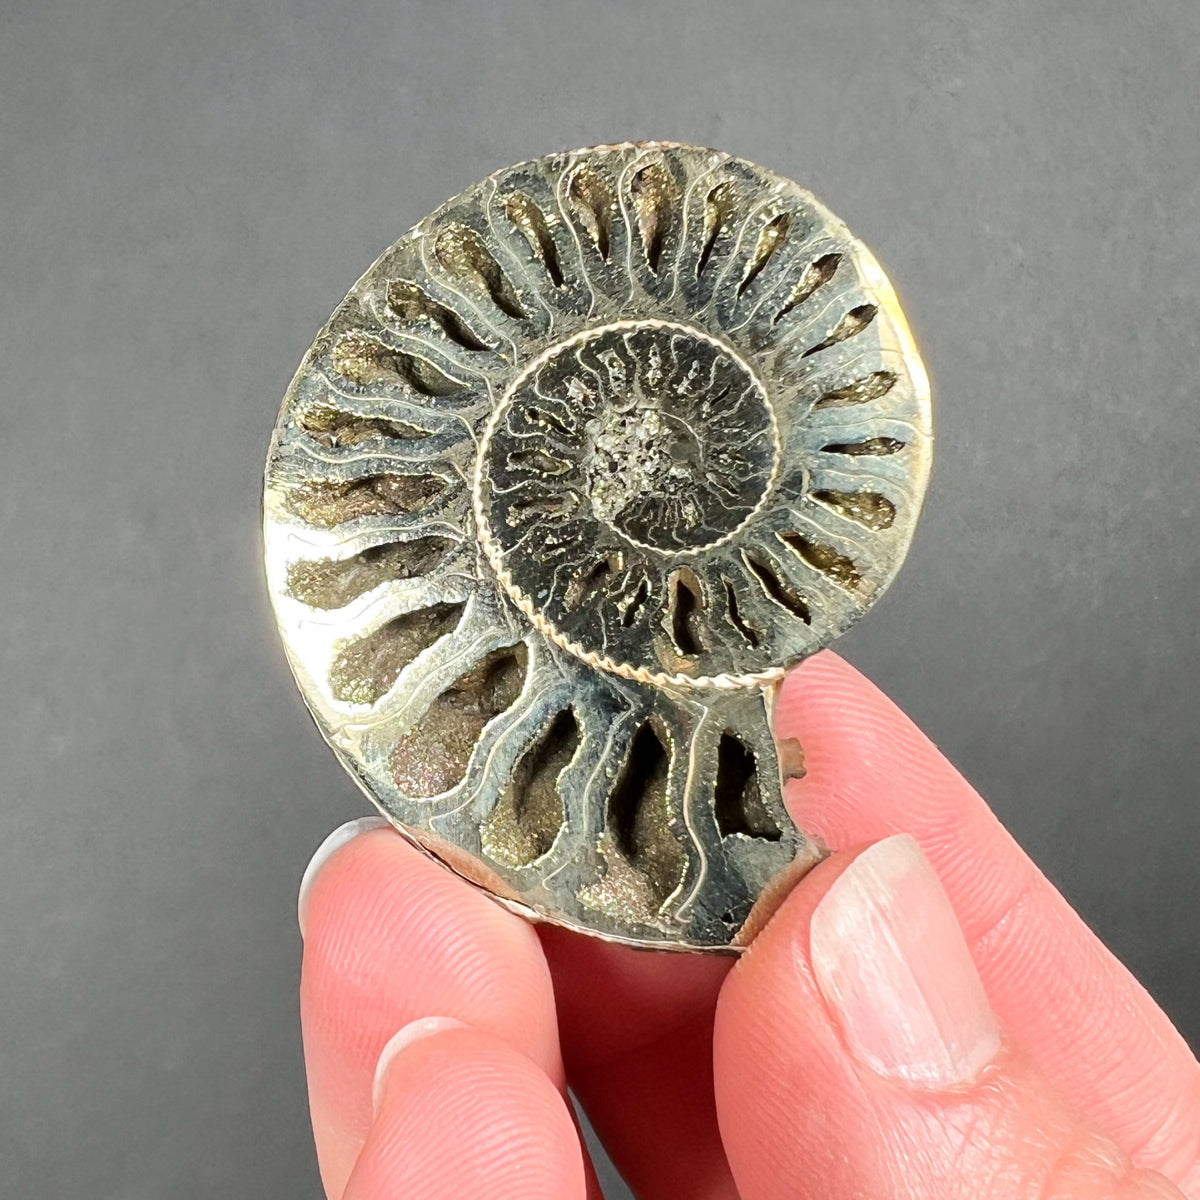 Ammonite Shell Replaced by Fools Gold